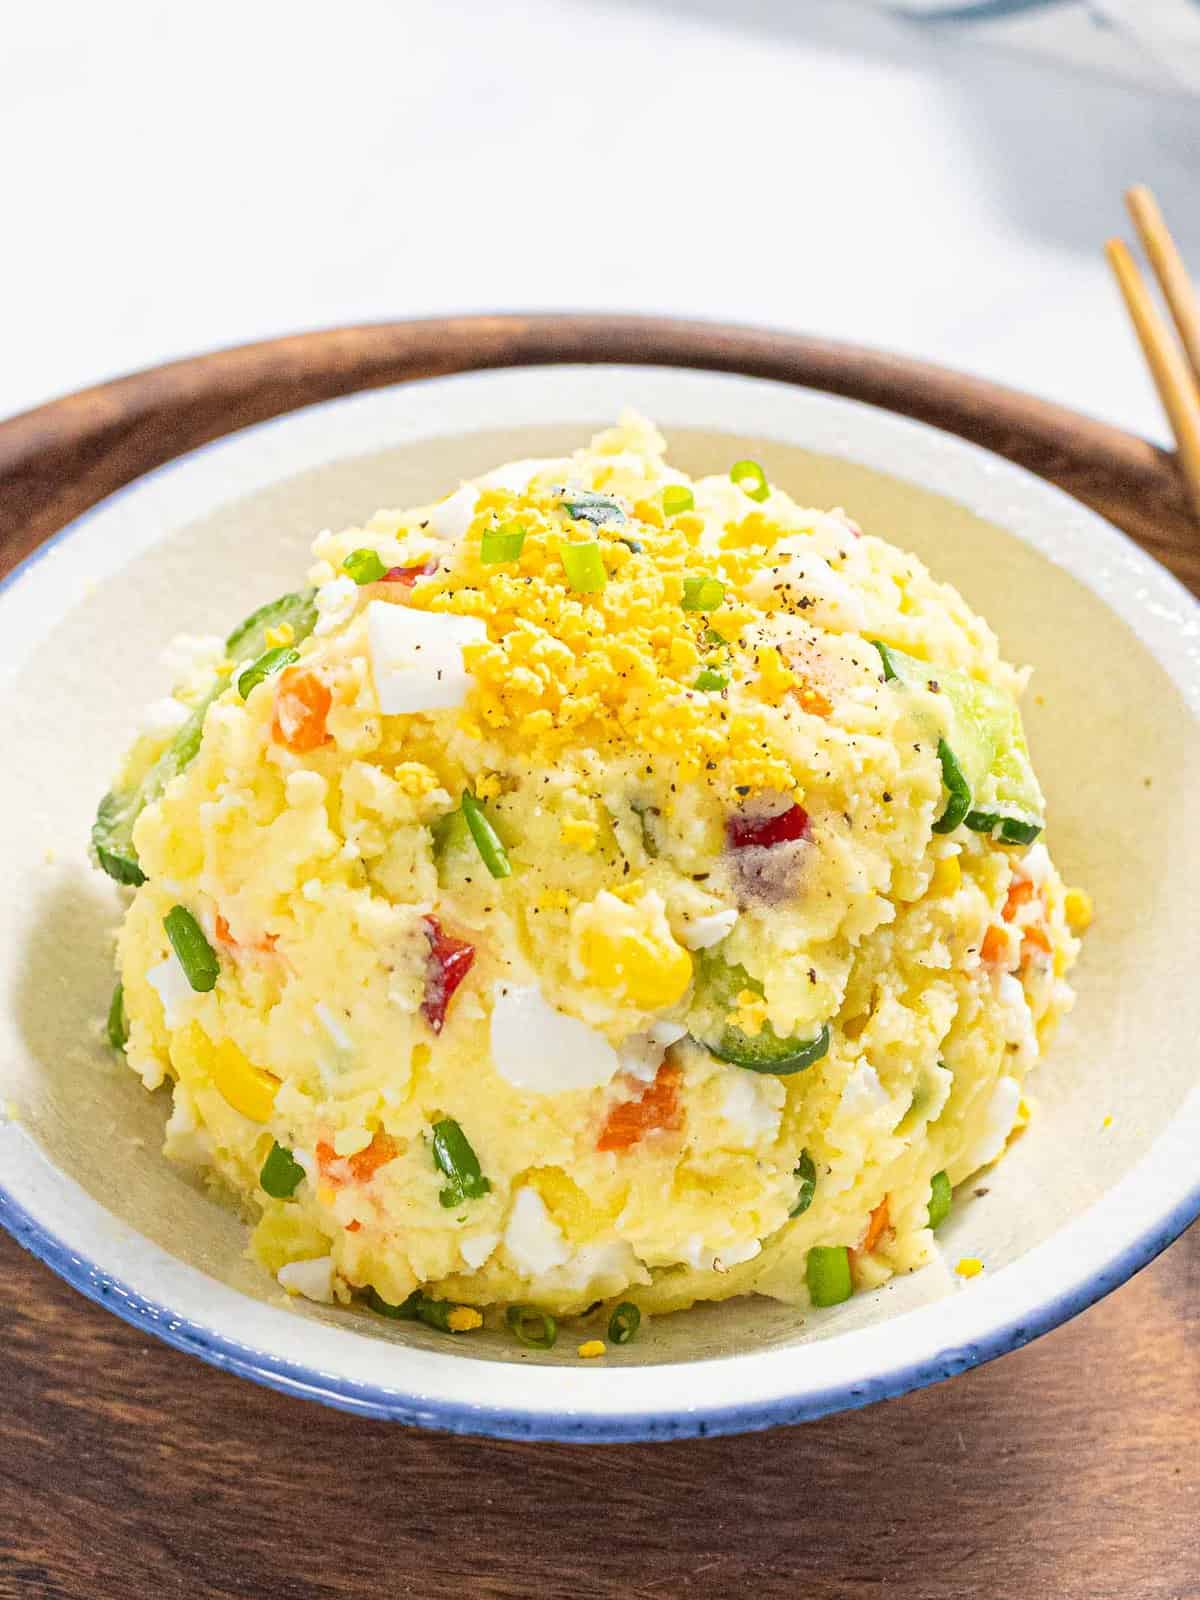 Korean potato salad with carrots, cucumber, and egg in a bowl.